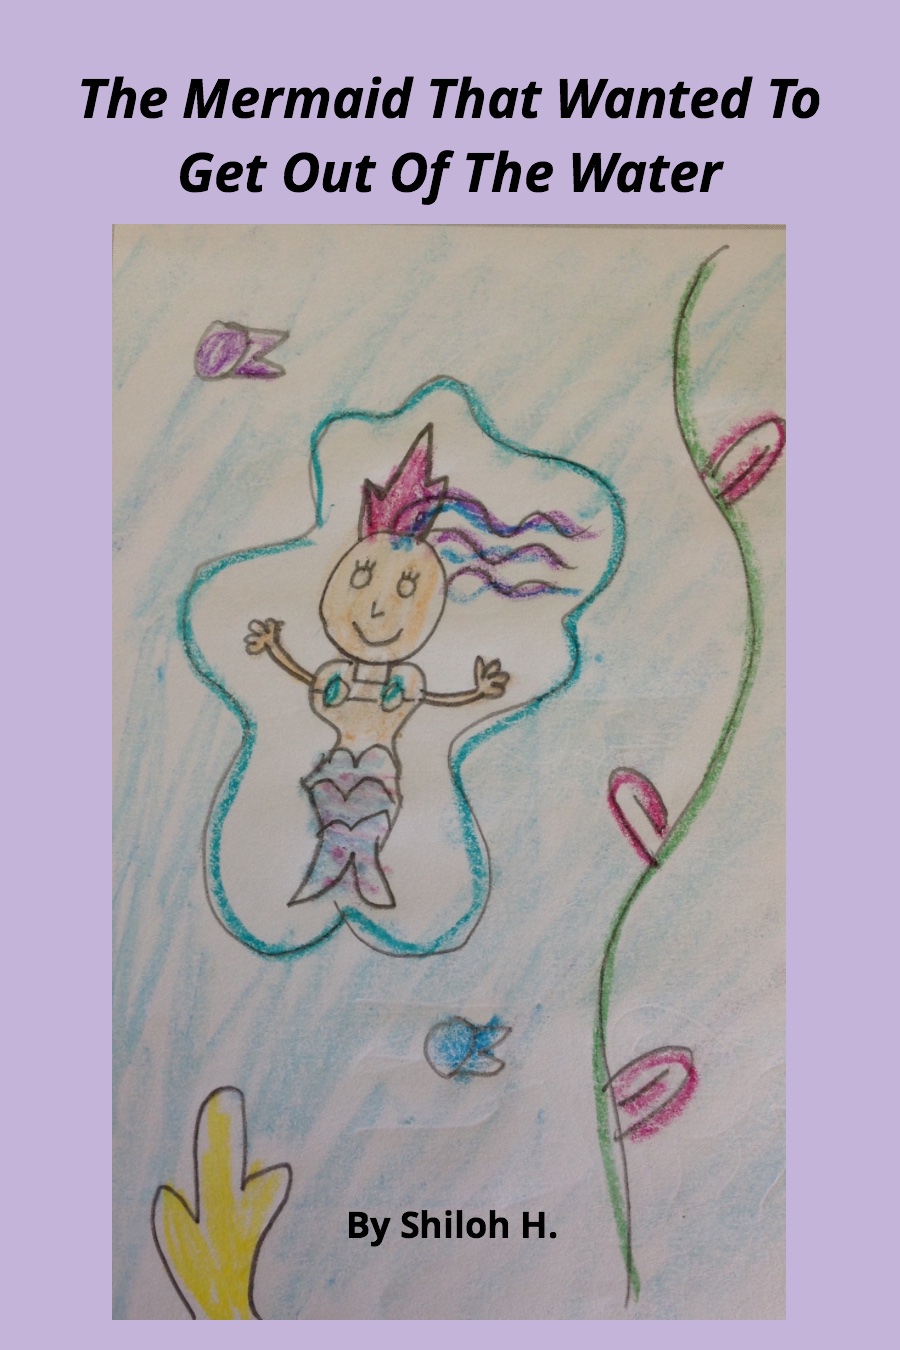 The Mermaid that Wanted to Get Out of the Water by Shiloh